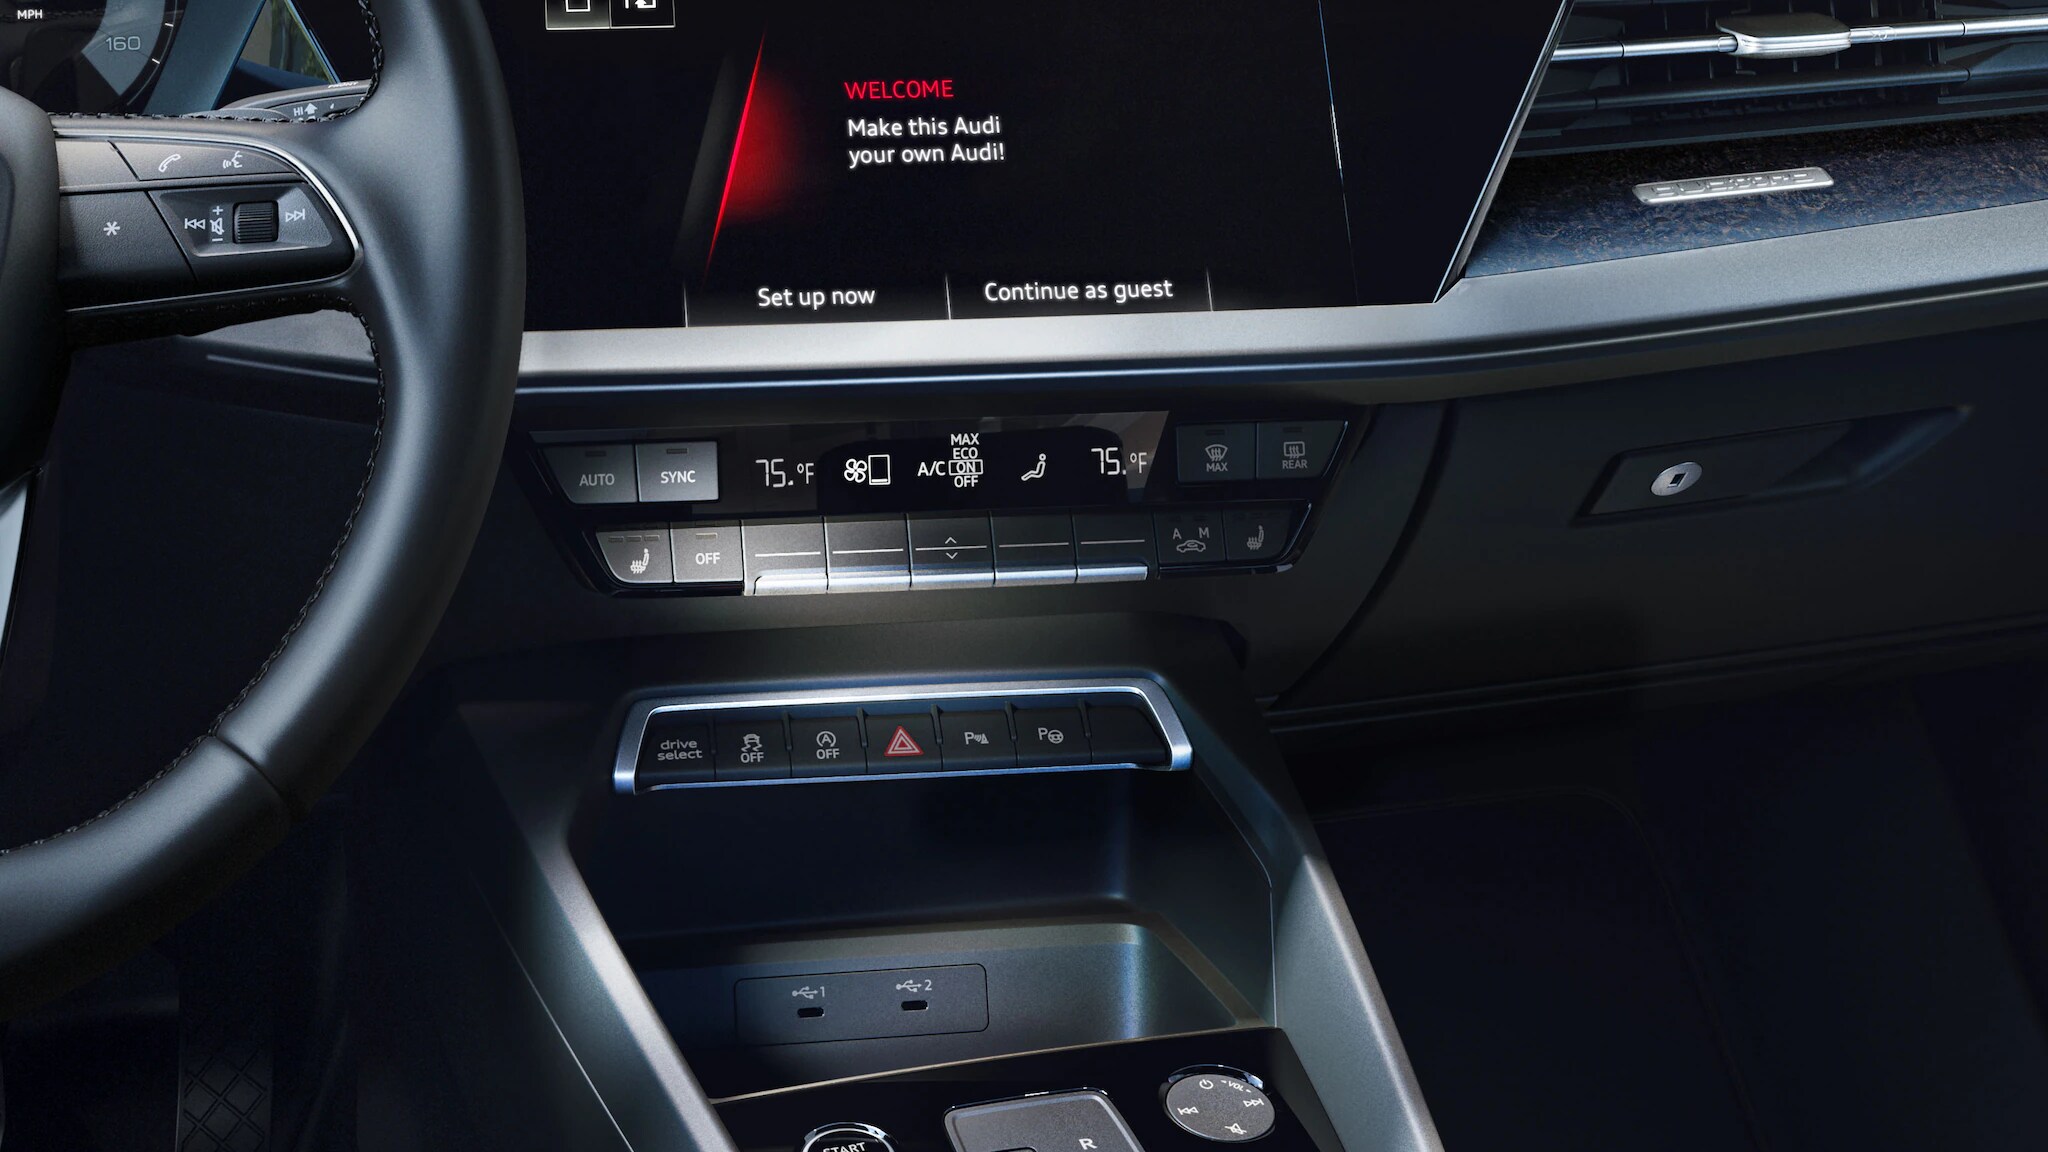 2022 Audi A3 mmi touch display infotainment system